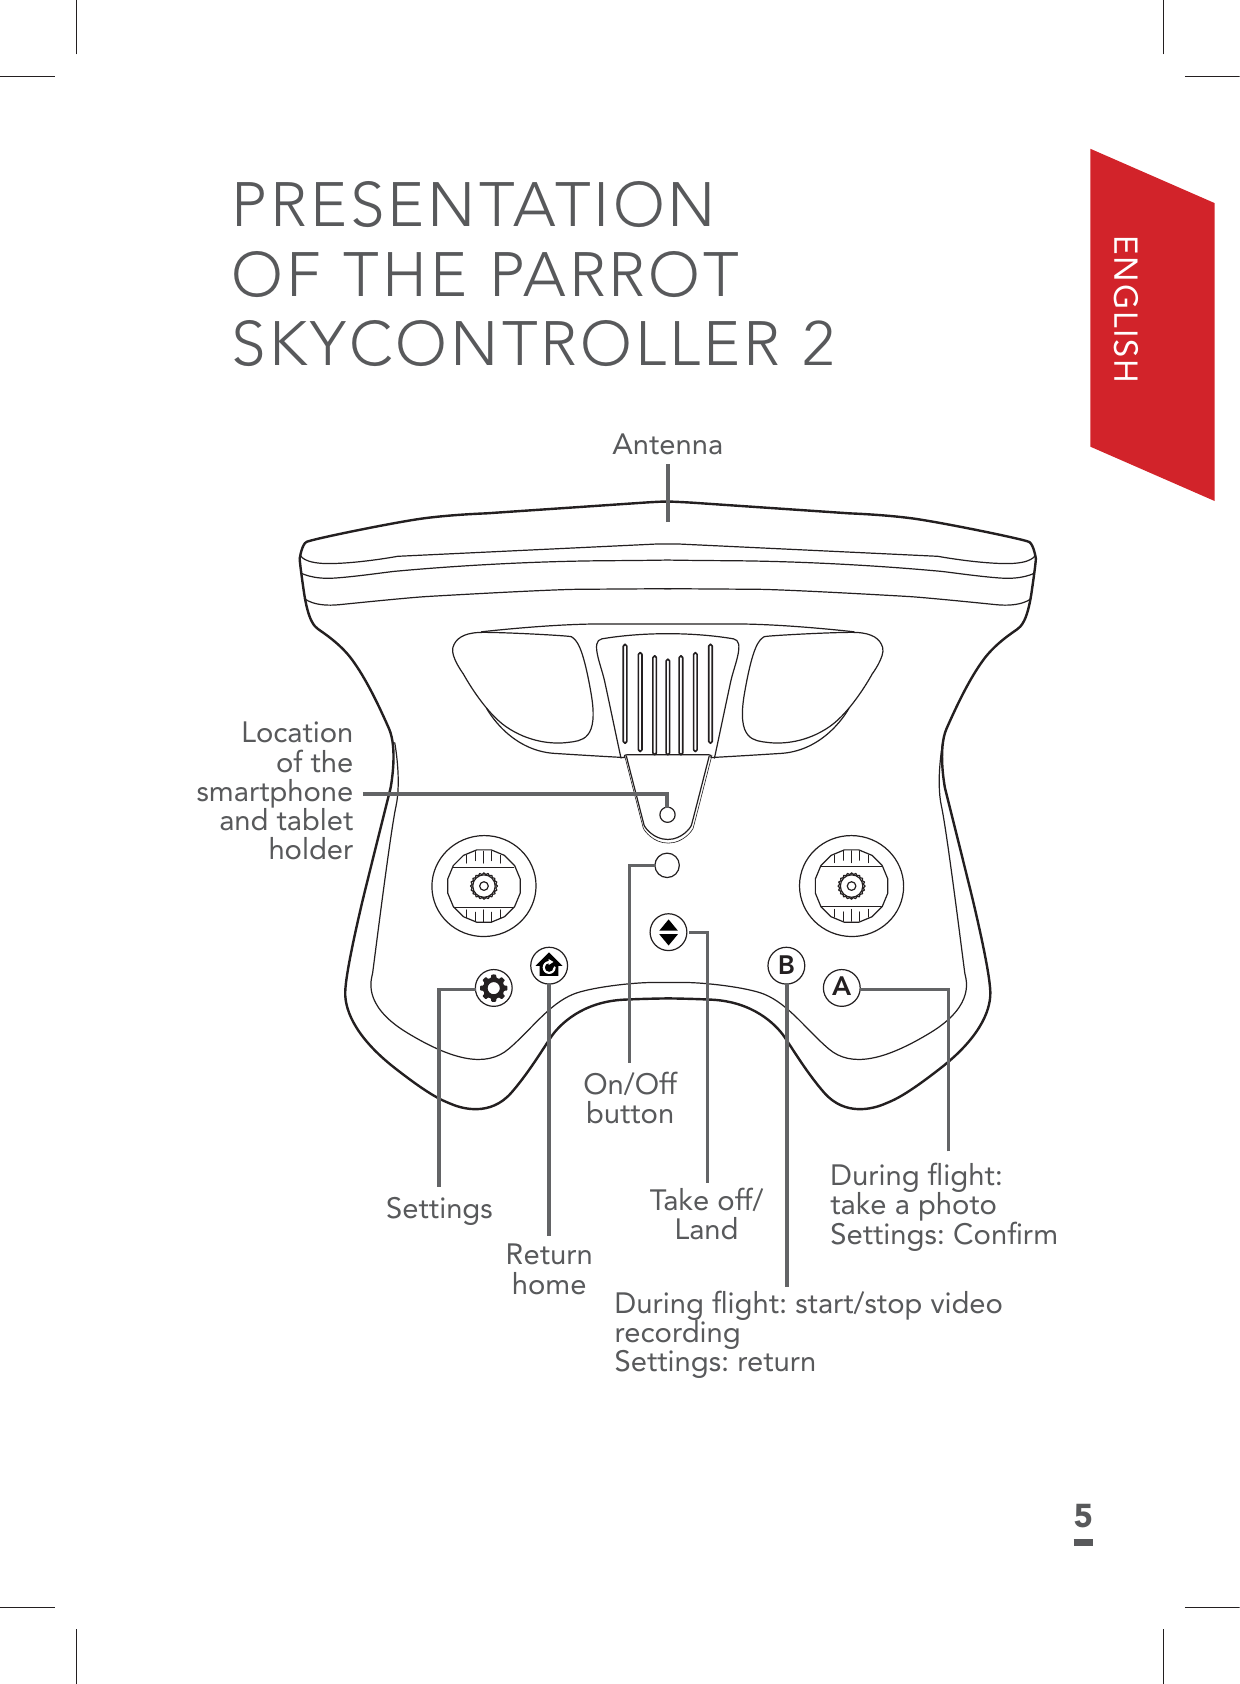 5ENGLISHPRESENTATION OF THE PARROT SKYCONTROLLER 2BAAntennaLocation of the smartphone and tablet holderOn/Off buttonReturn homeTake off/LandDuring ﬂight: start/stop video  recordingSettings: returnDuring ﬂight:  take a photoSettings: ConﬁrmSettings